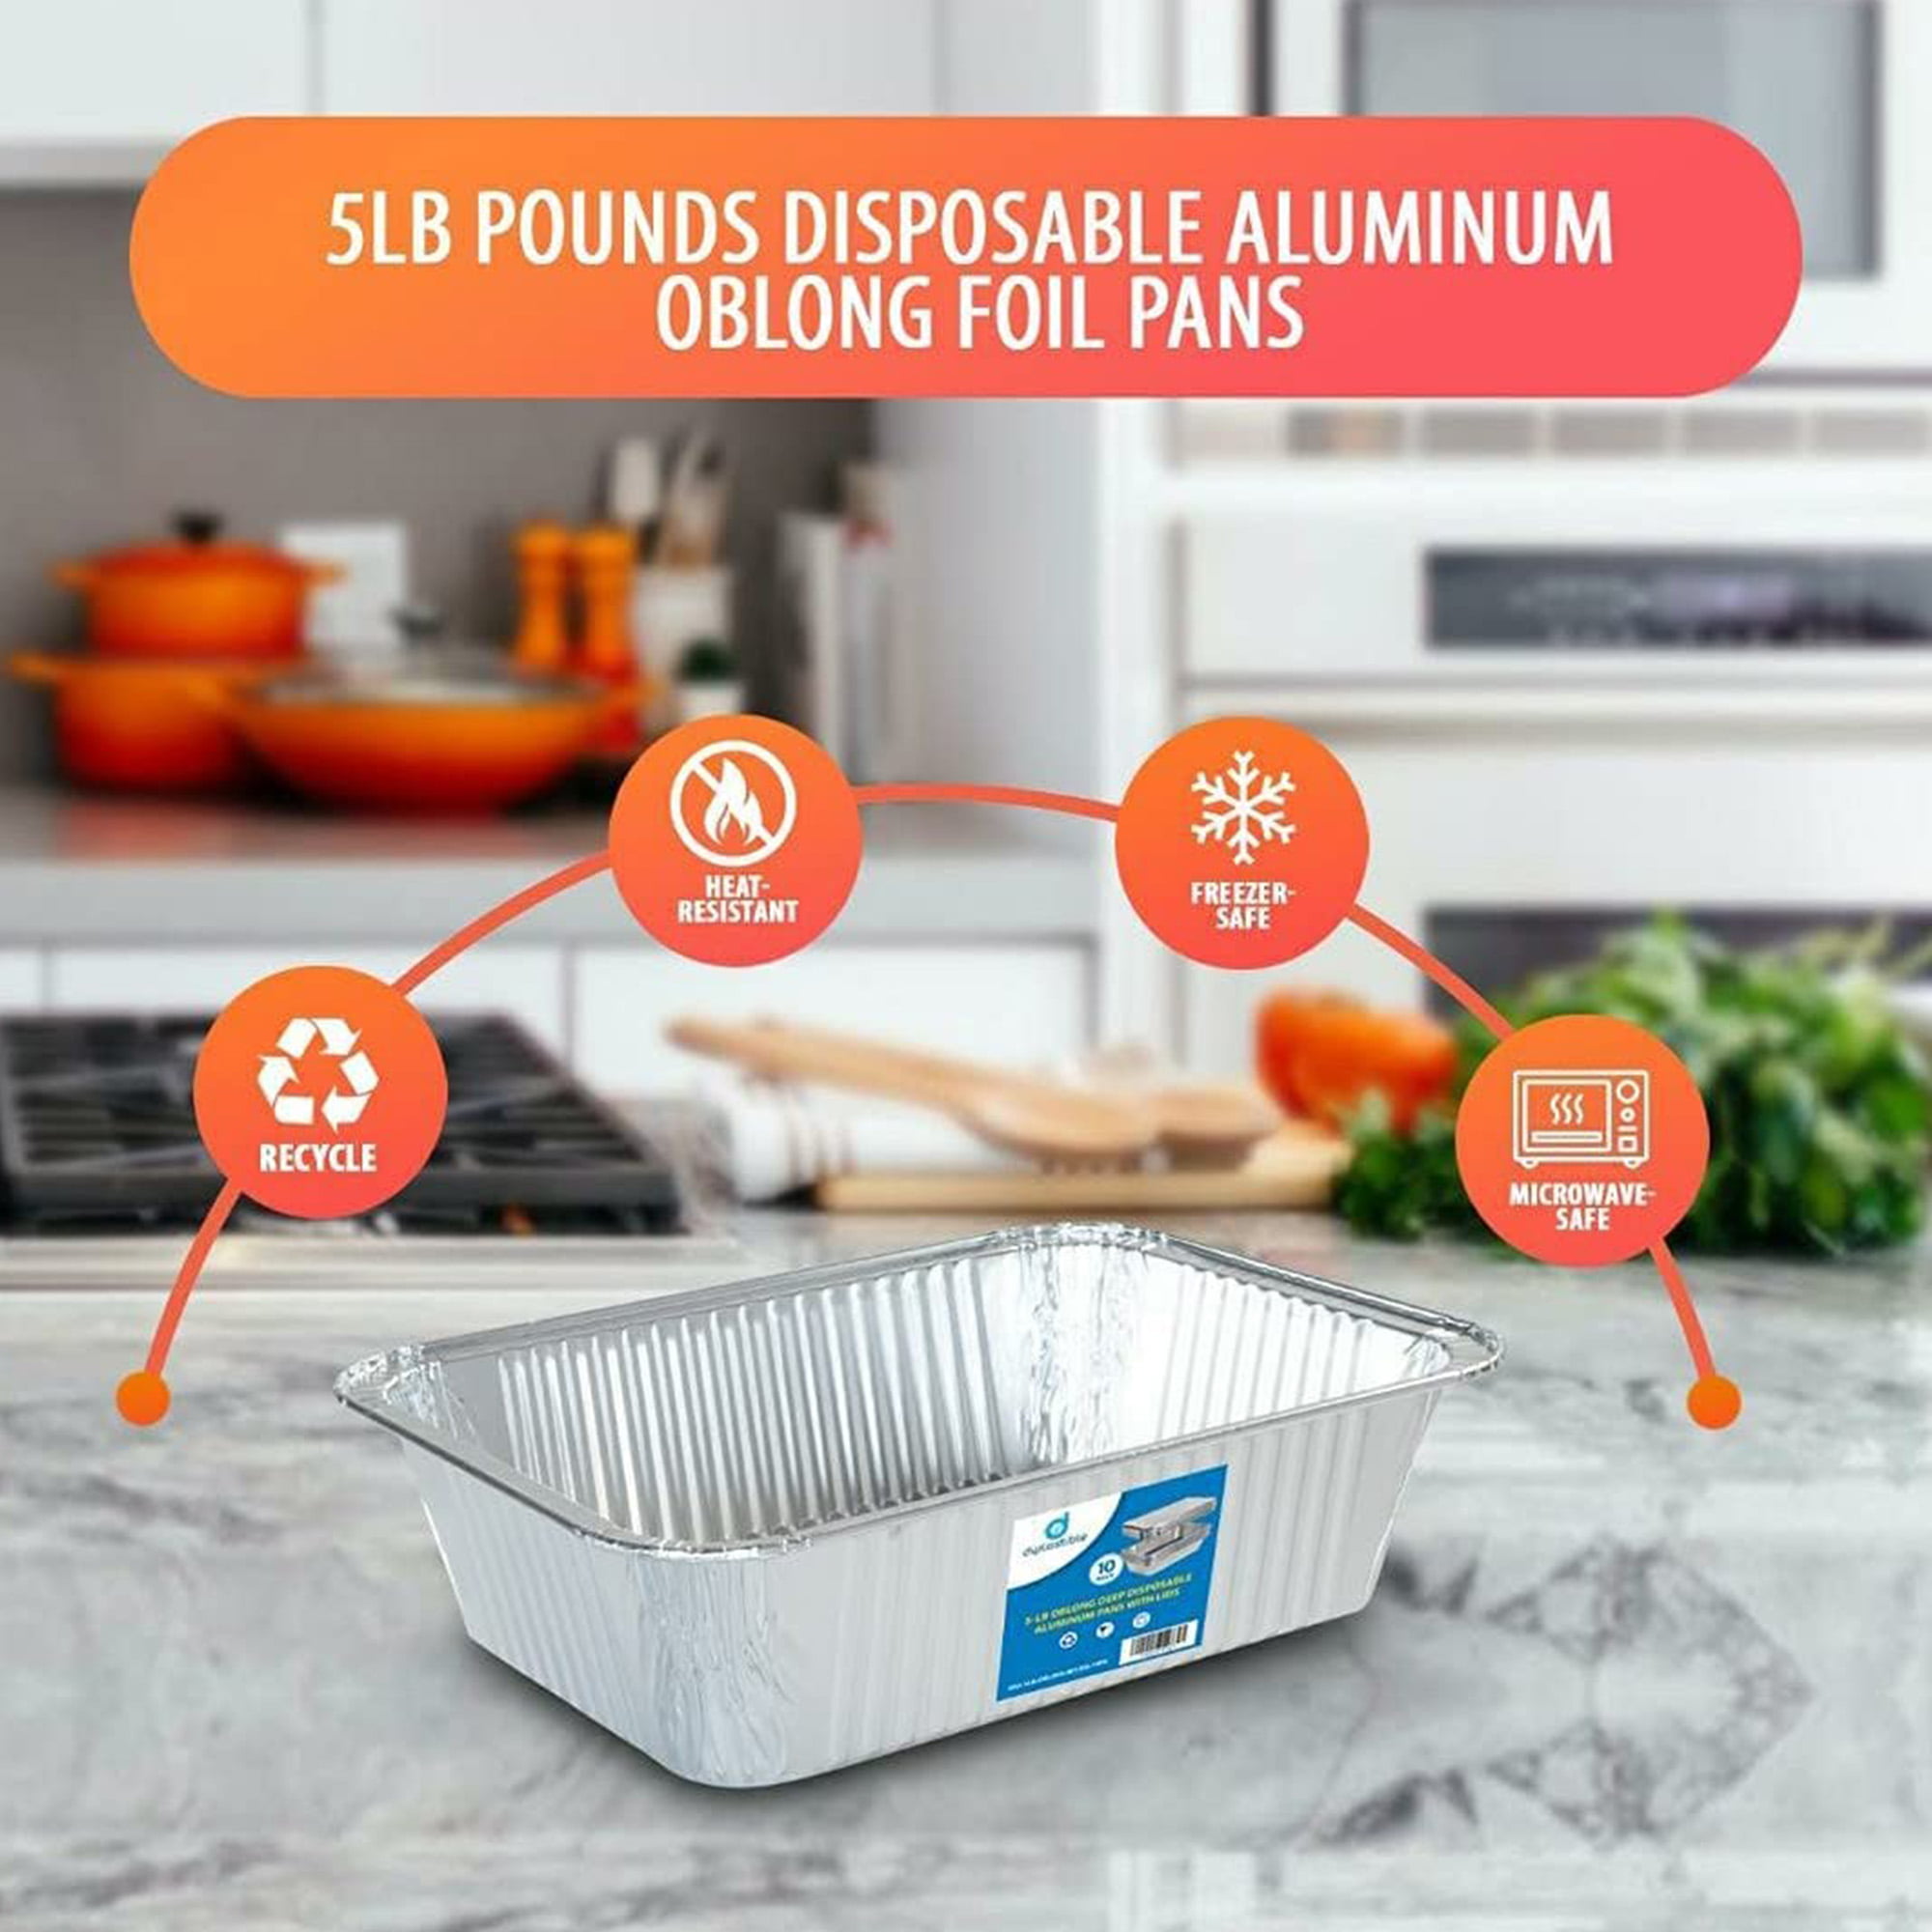 Disposable Square 8x8 Aluminum Foil Storage Pans with Lids (10 Count) by Stock Your Home, Size: 10 Count w/ Lids, Silver